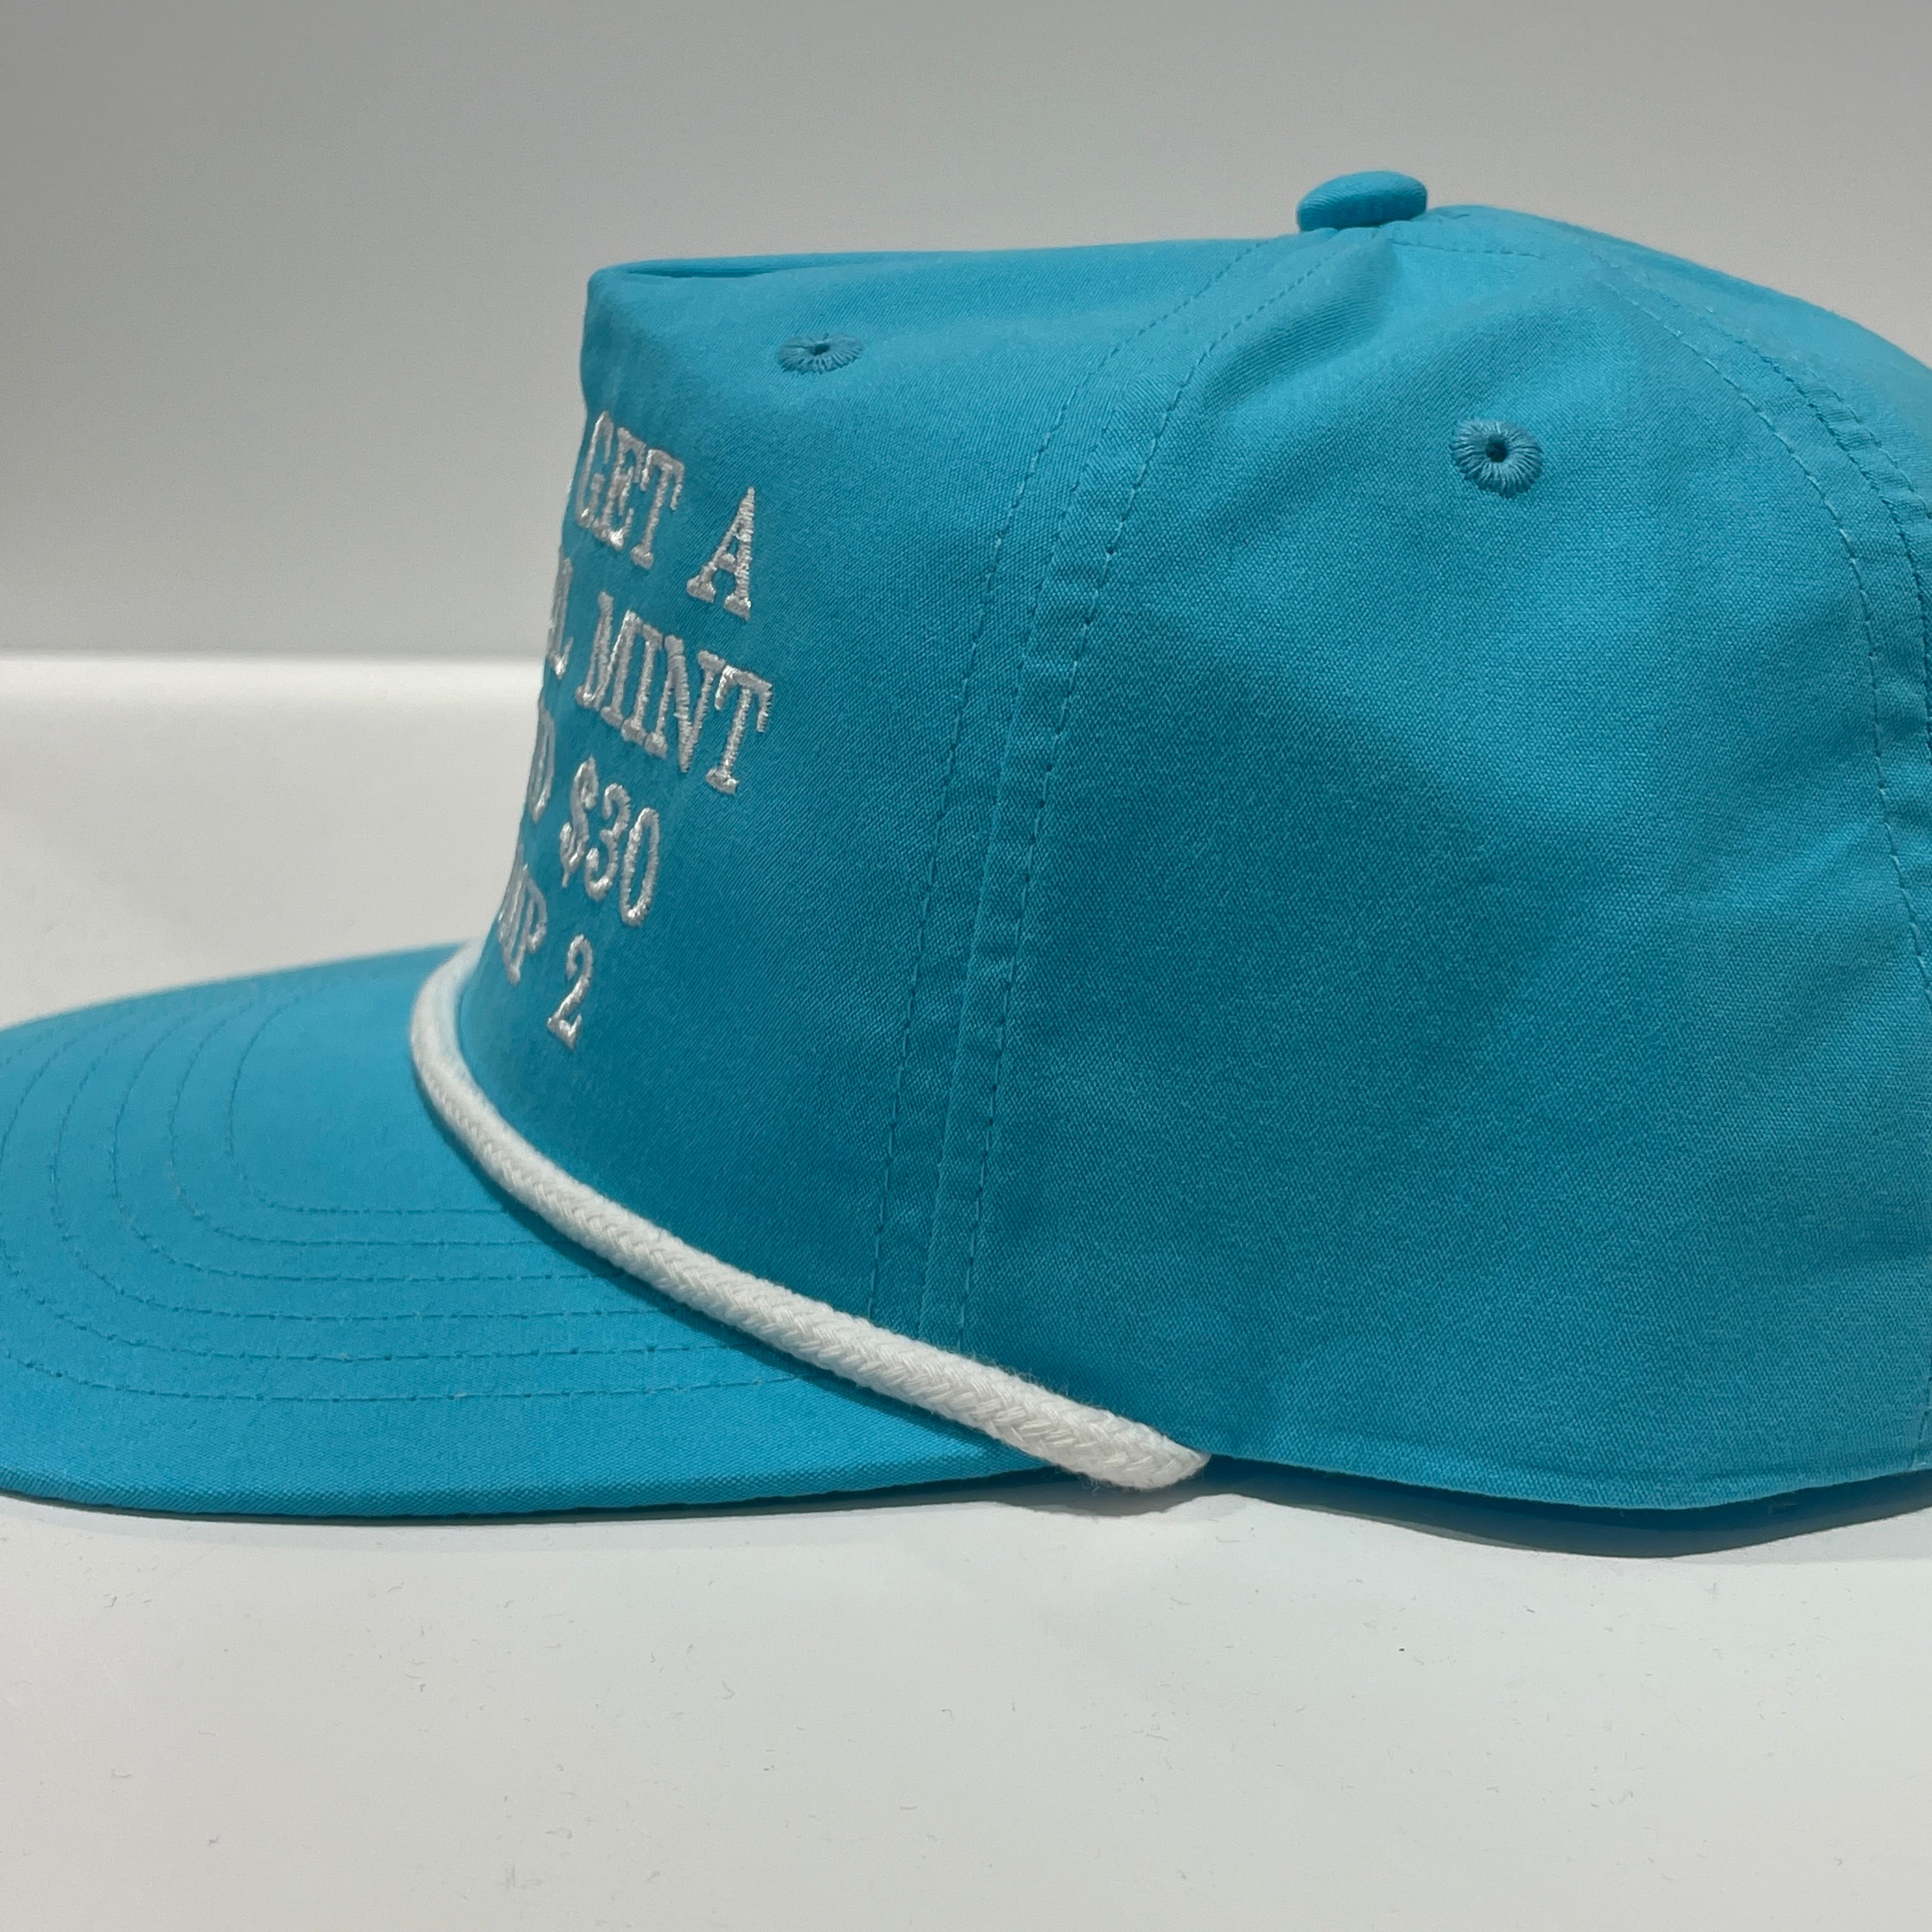 Lemme Get A 6Mg Cool Mint Zyn and $30 On Pump 2 – Old School Hats